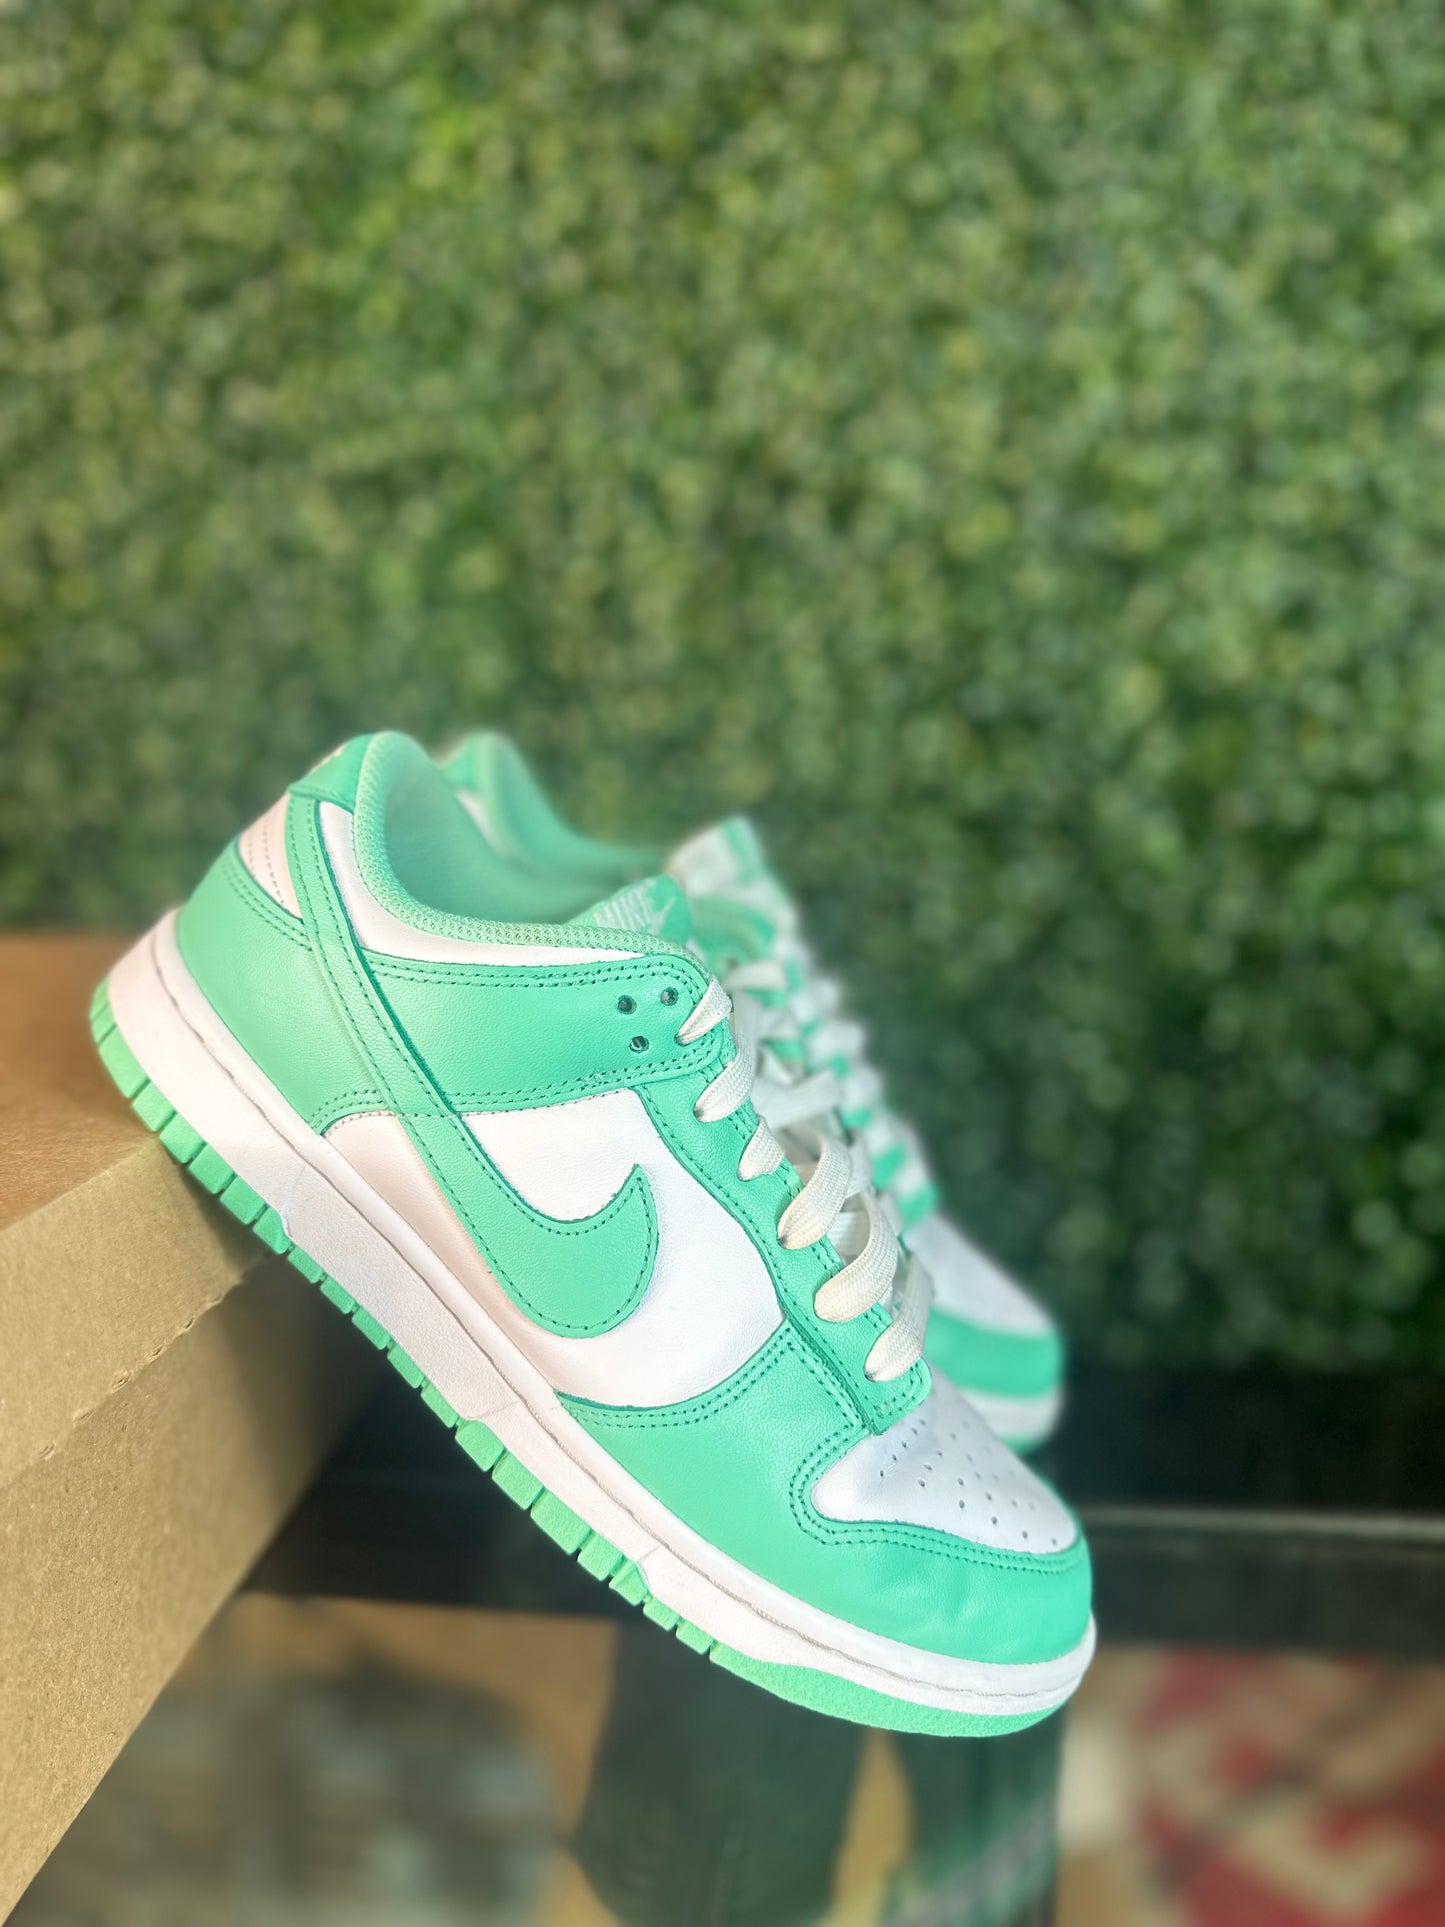 Nike Dunk Low “Green Glow” Size 6.5M/8W CLEAN RB